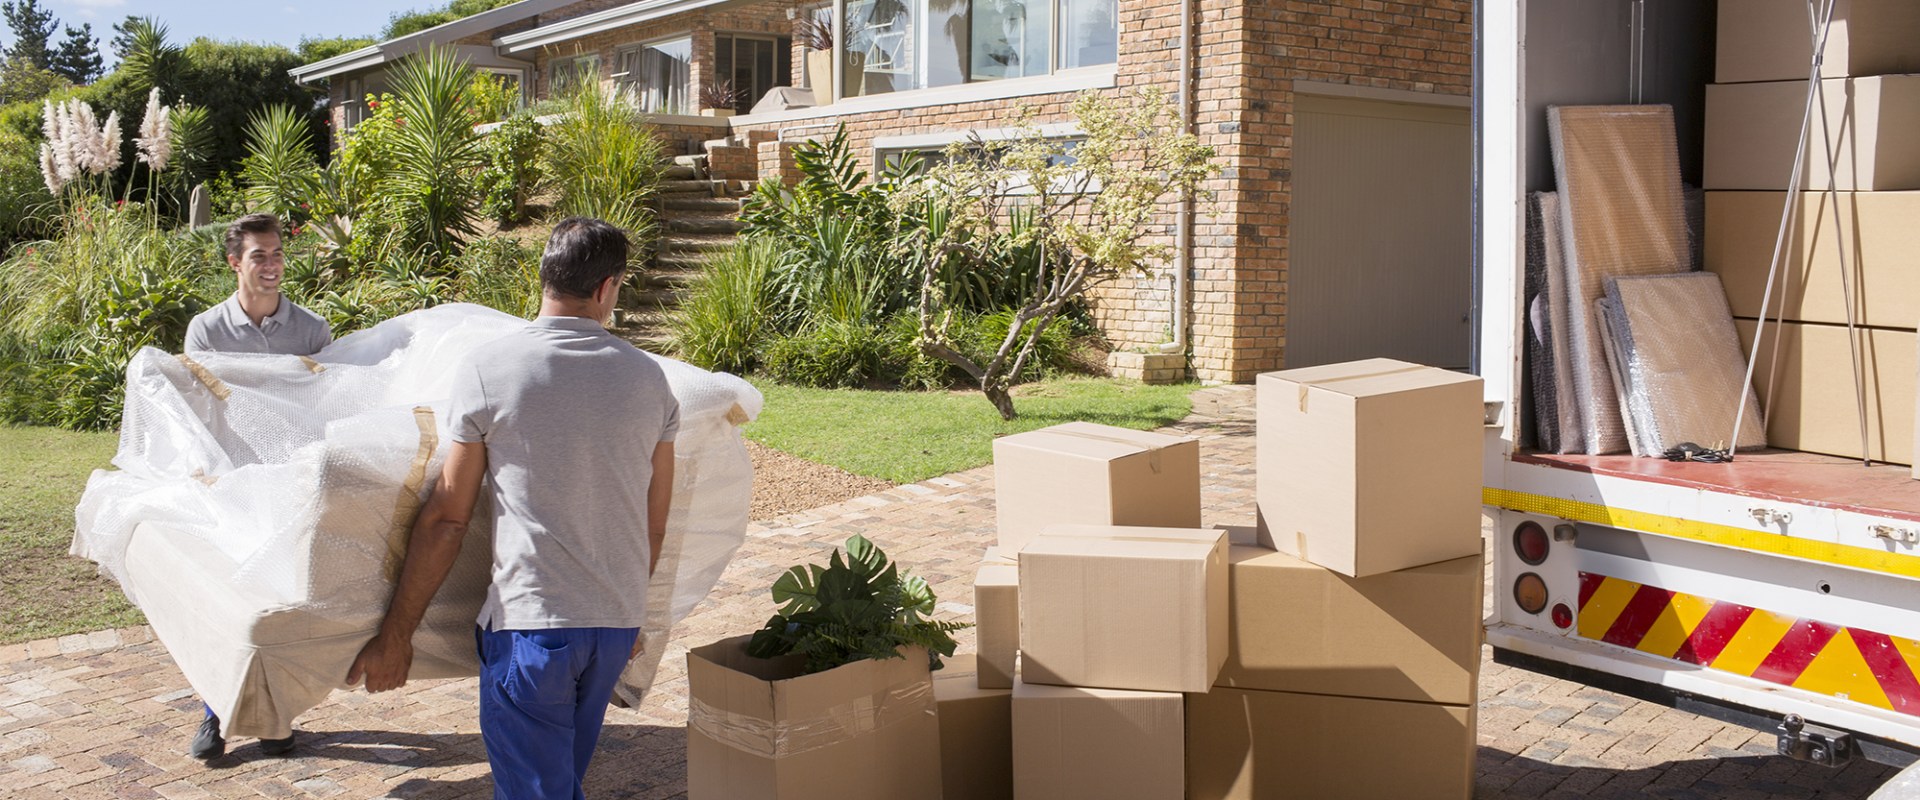 Unload at your New Home: An Informative Guide